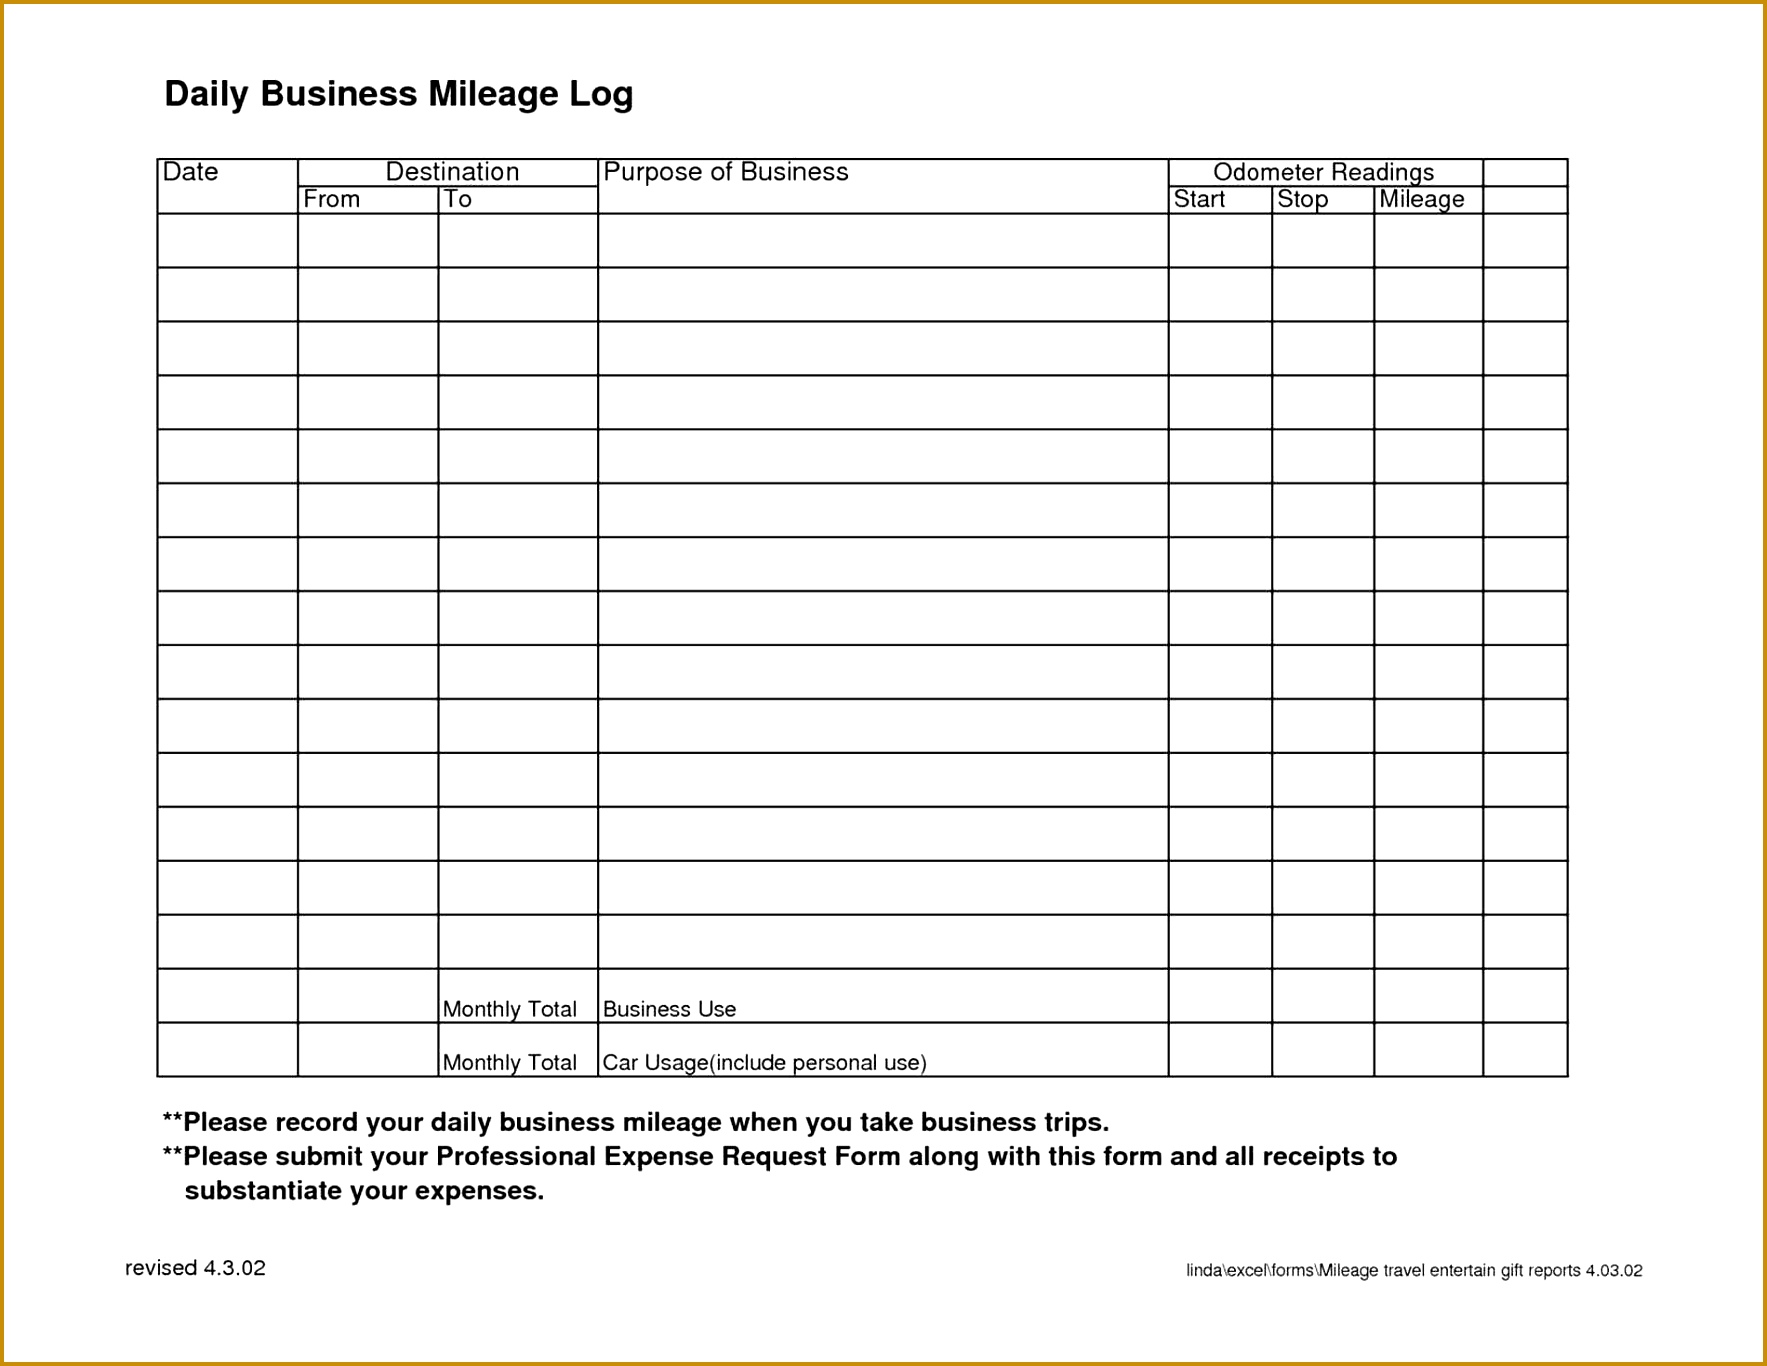 Project Expenses Template Timetable Template Word Sign Up Sheet In Vehicle Vehicle Expense Log Template Mileage Log Teknoswitch Printable Sheet Template 13661767